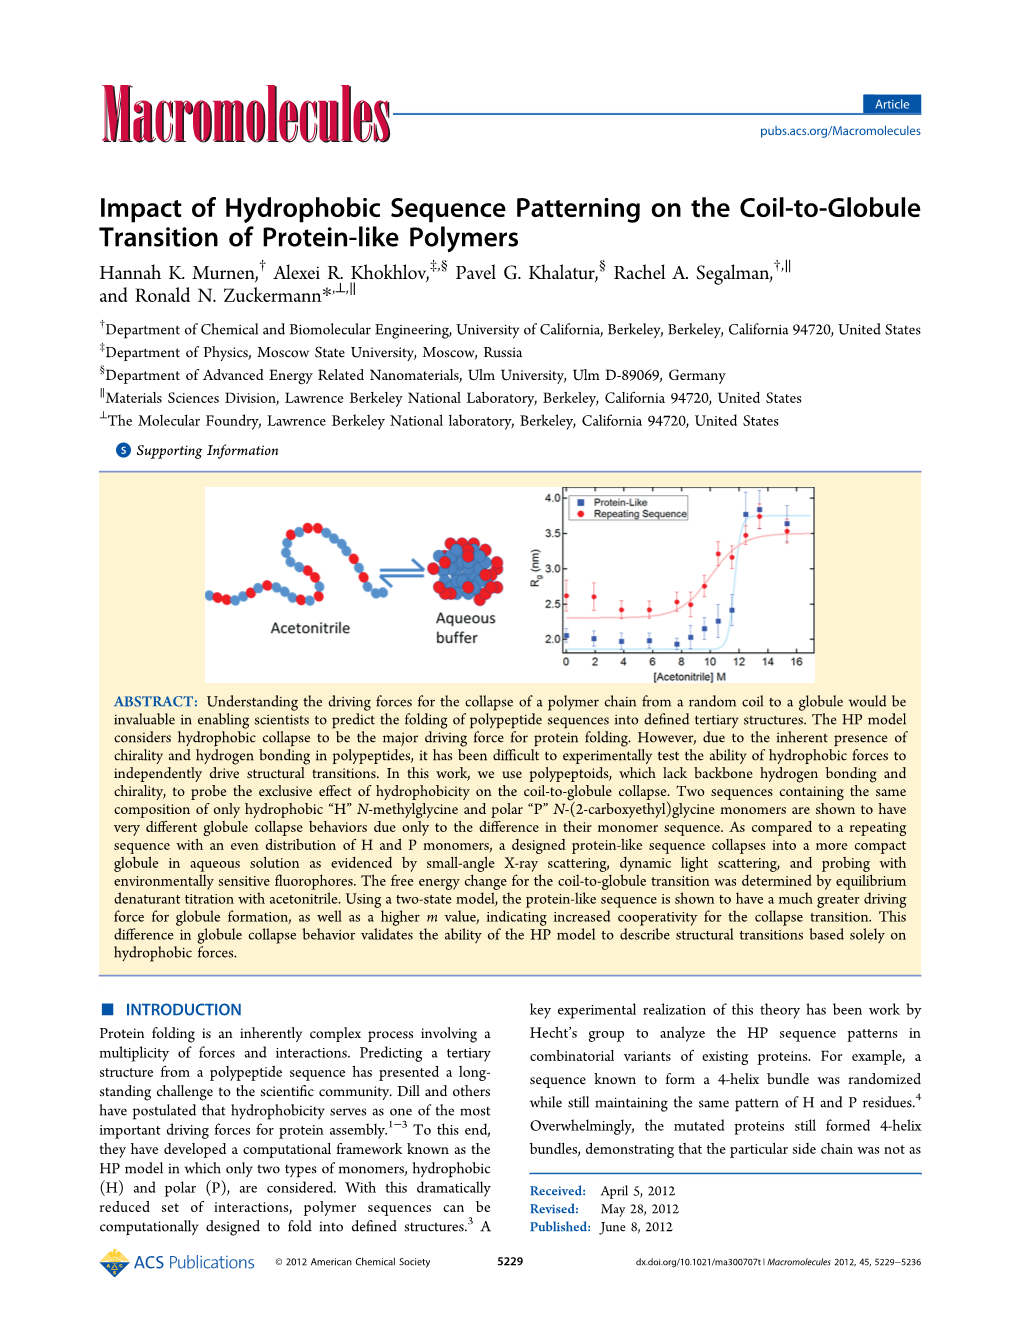 Impact of Hydrophobic Sequence Patterning on the Coil-To-Globule Transition of Protein-Like Polymers Hannah K